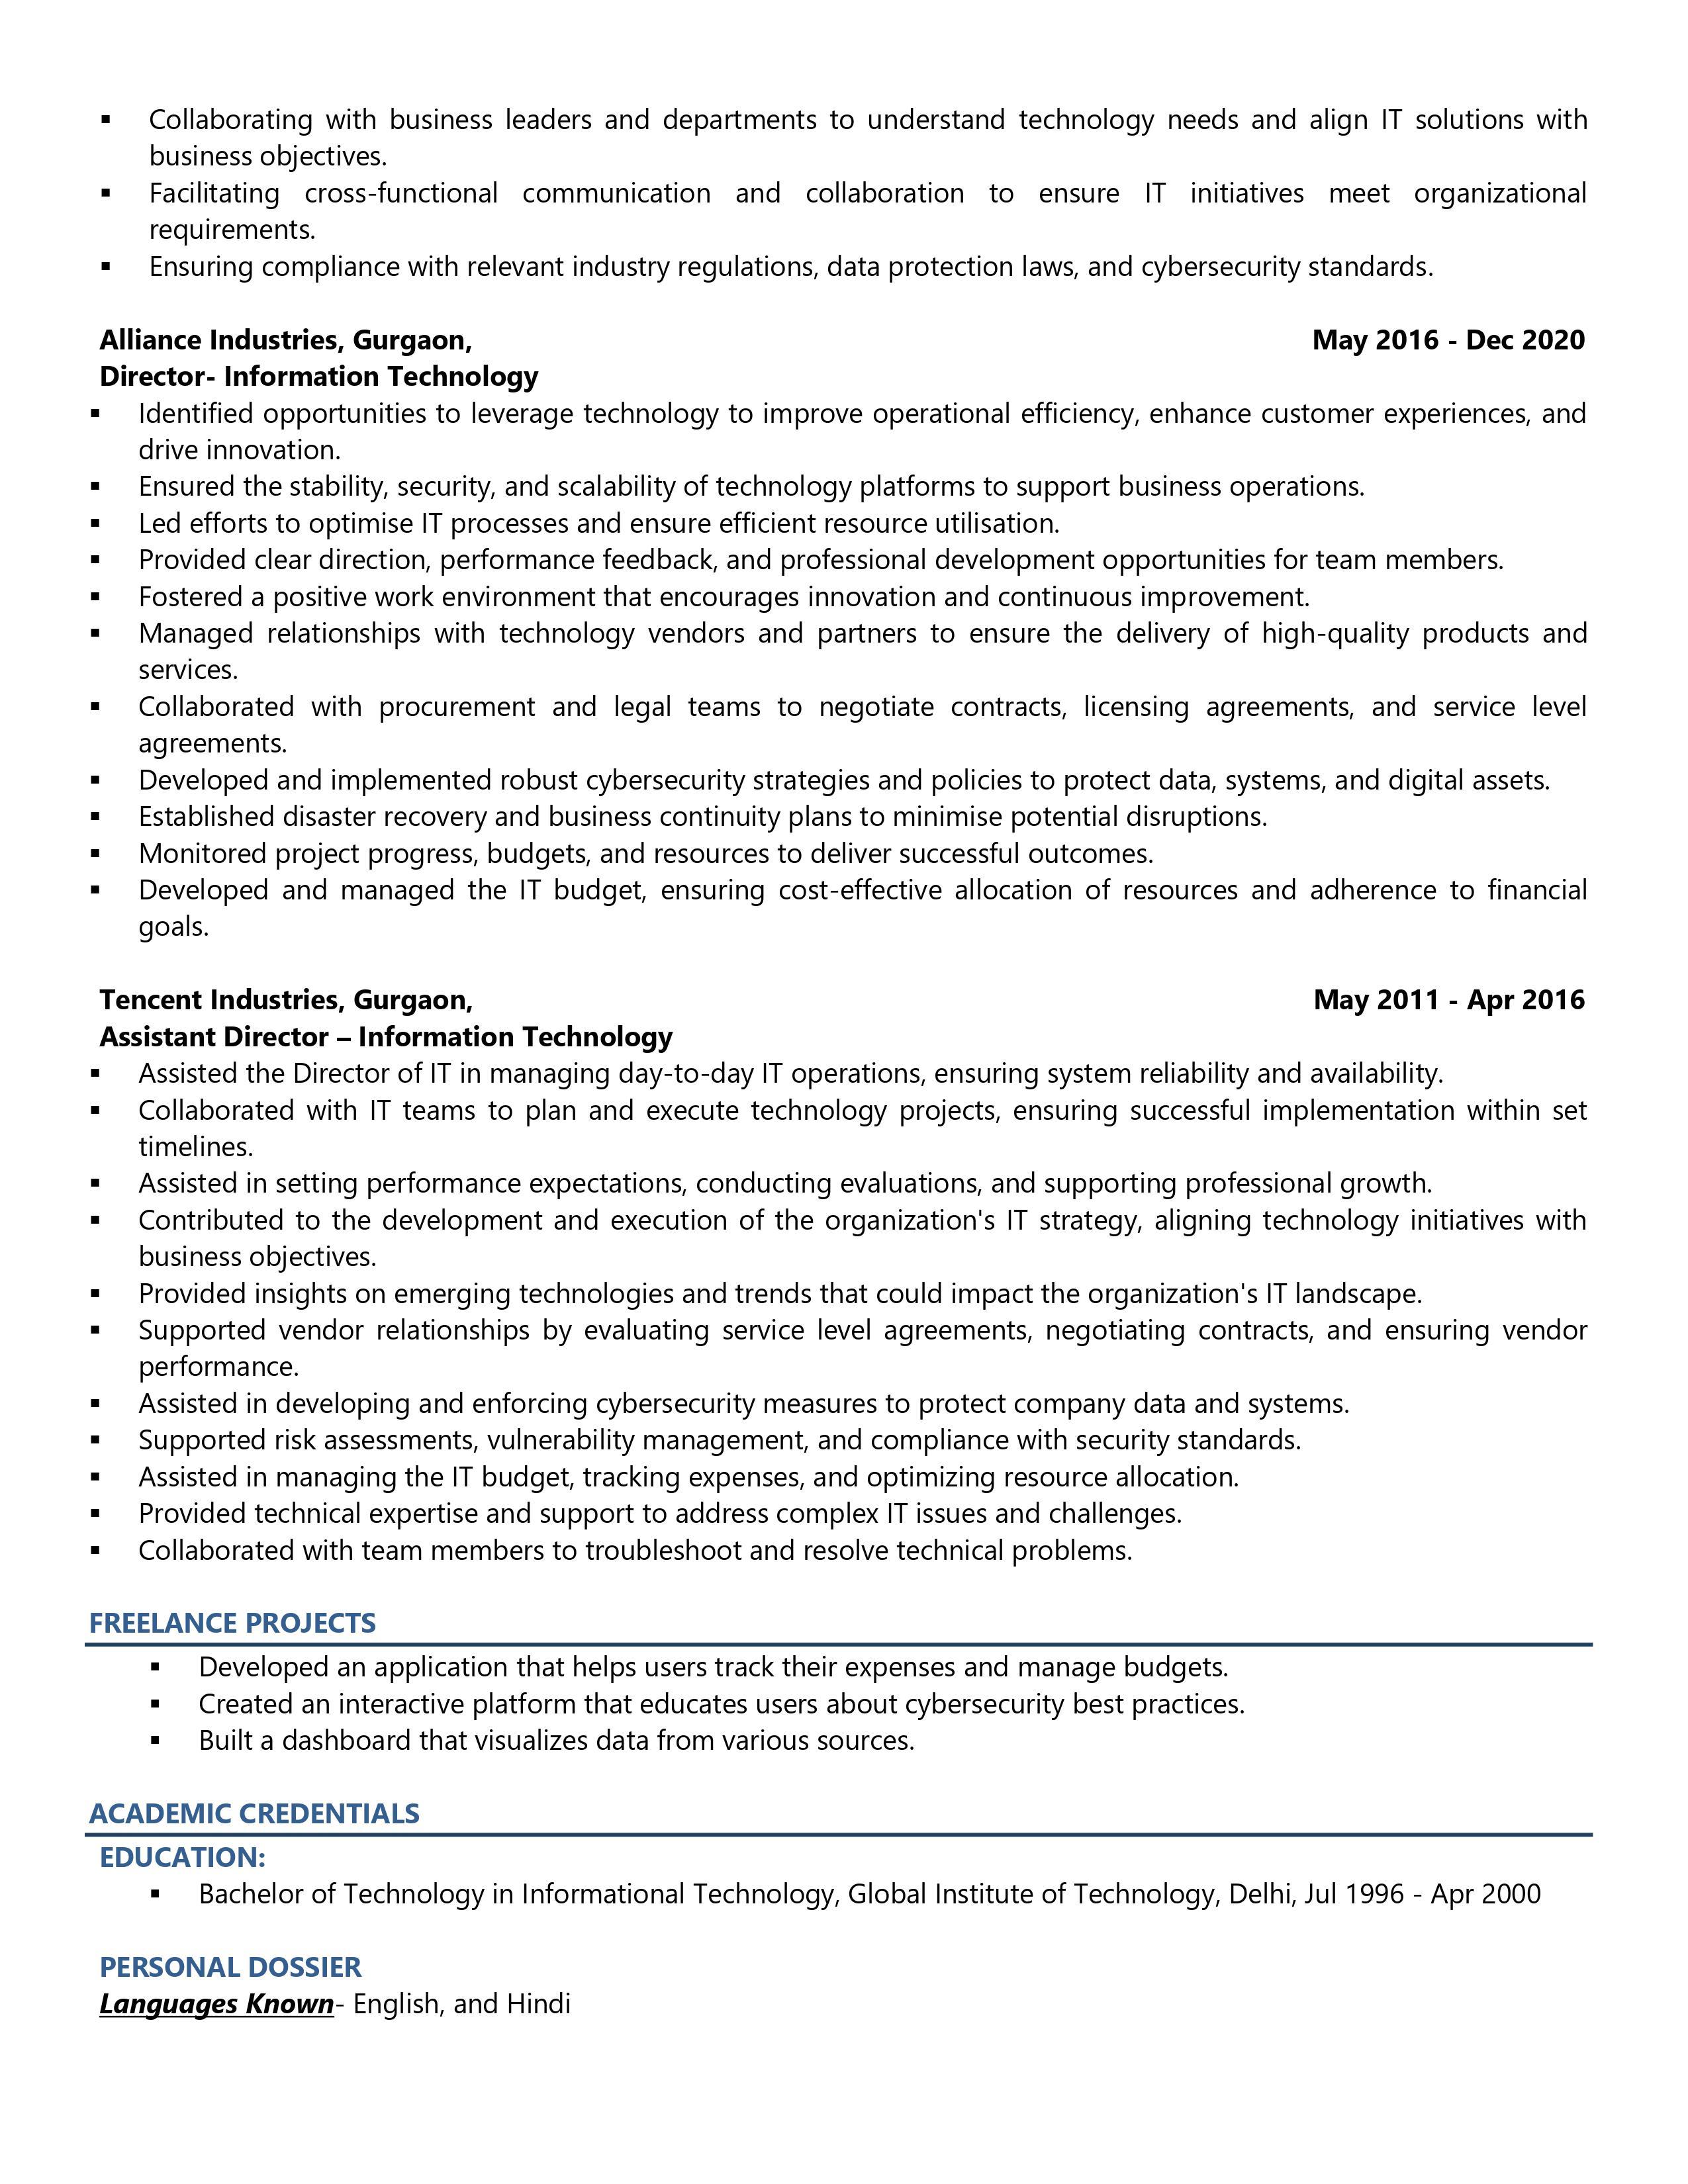 Chief Information Officer (CIO) - Resume Example & Template